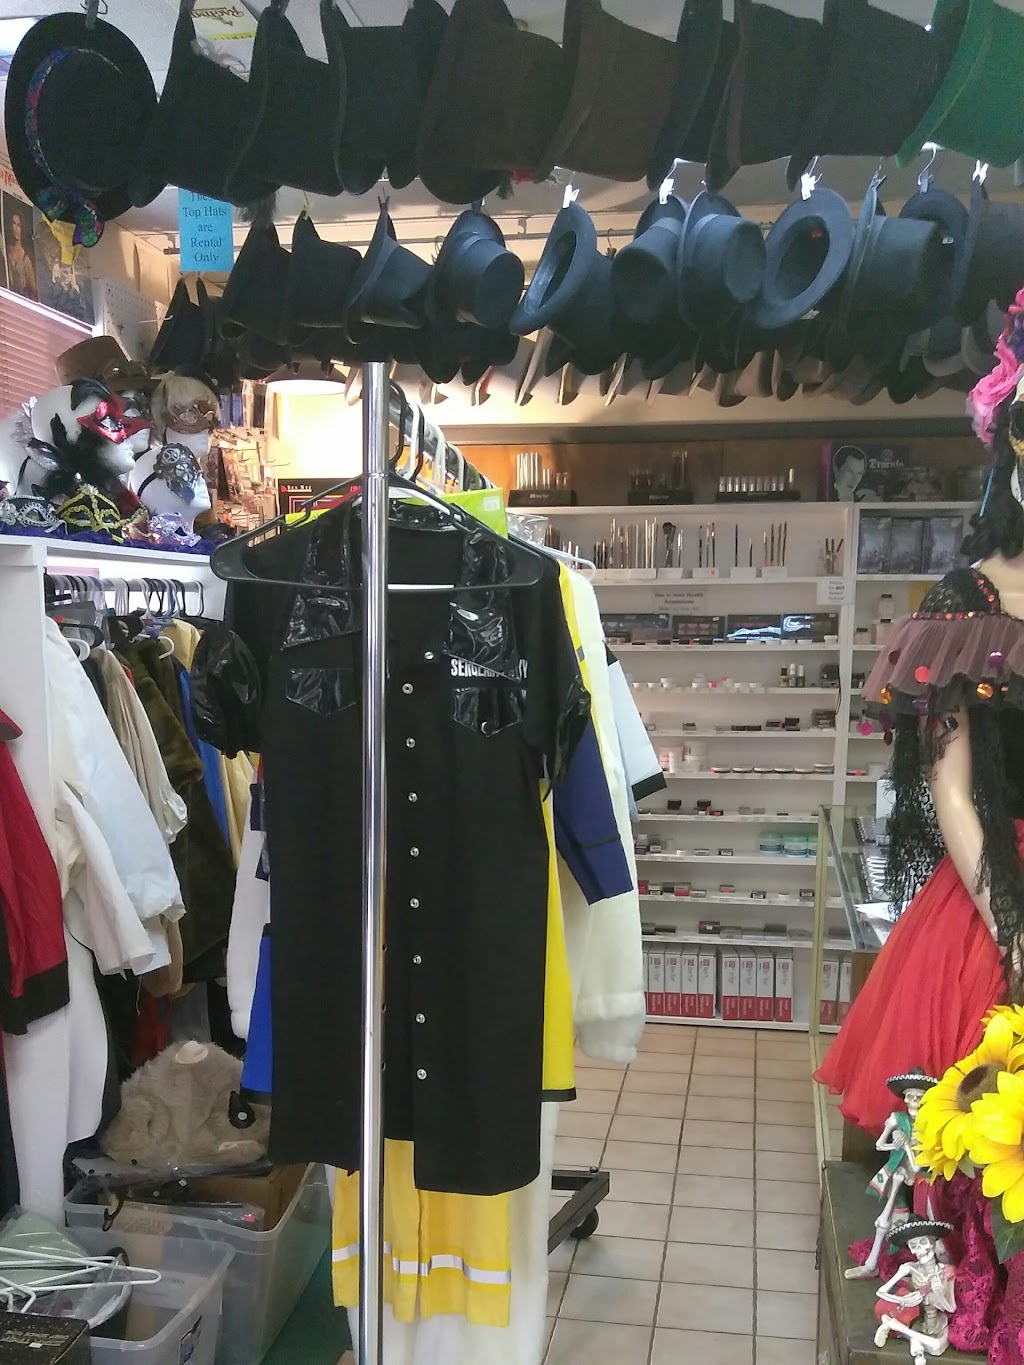 Costumes By Dusty | 324 Exchange Dr, Arlington, TX 76011 | Phone: (817) 548-5767